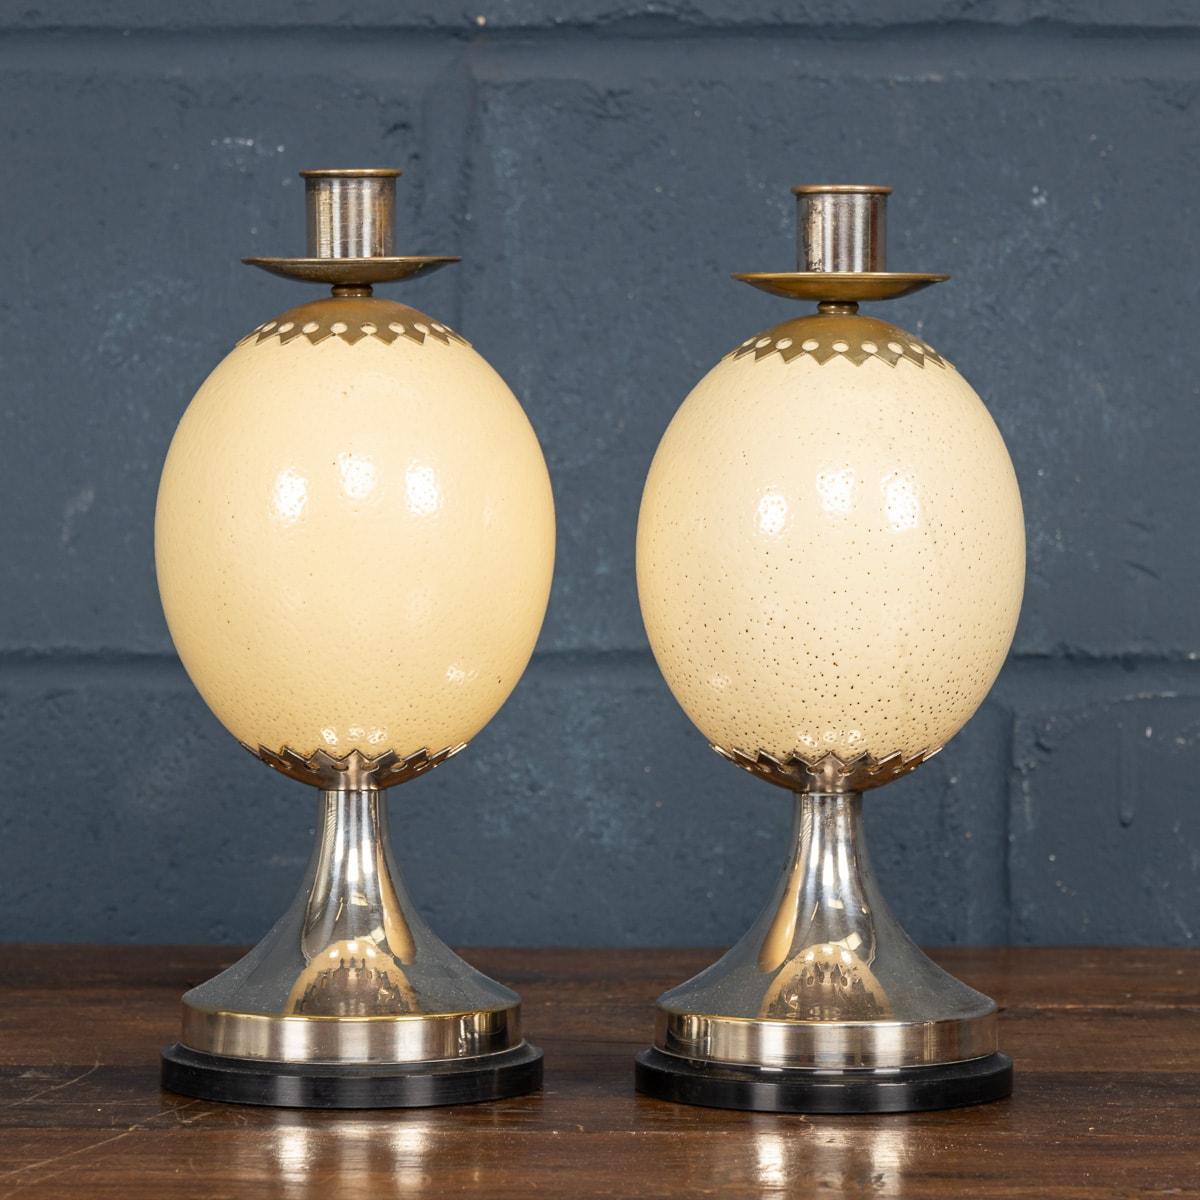 Pair Of Ostrich Egg Mounted Silver Plate Candlesticks By Anthony Redmile, c.1970 In Good Condition For Sale In Royal Tunbridge Wells, Kent